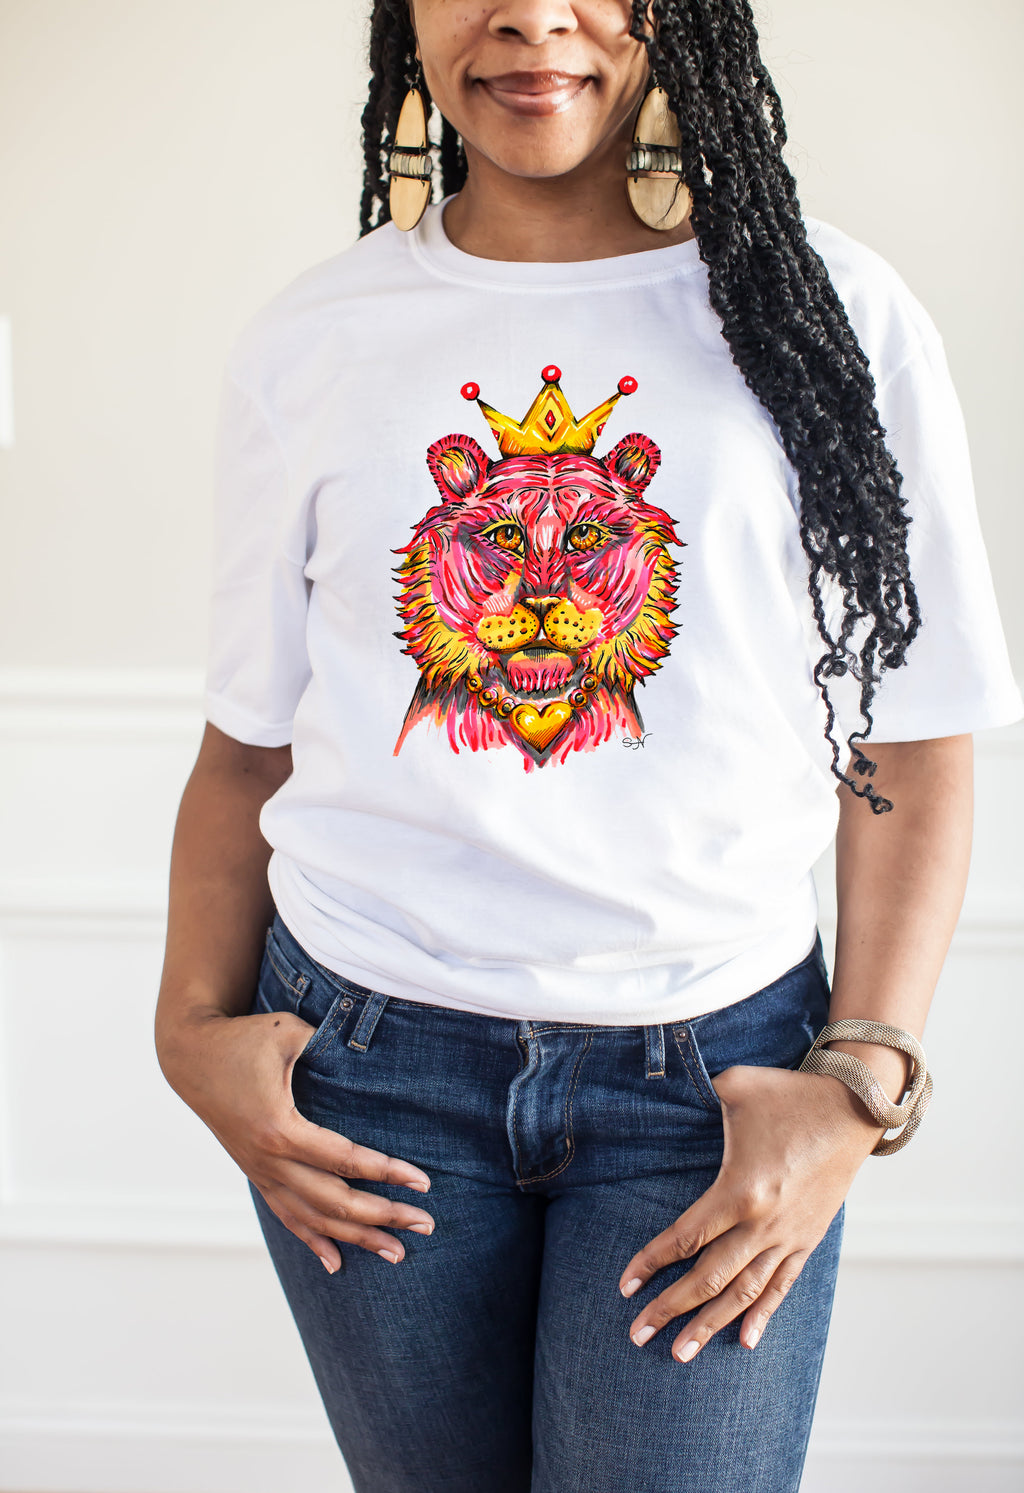 Lion Queen - Ladies T-Shirt (UK Sizes 8-40) - Artwork by the Very Talented Artist Sarah Neville - Made to Order